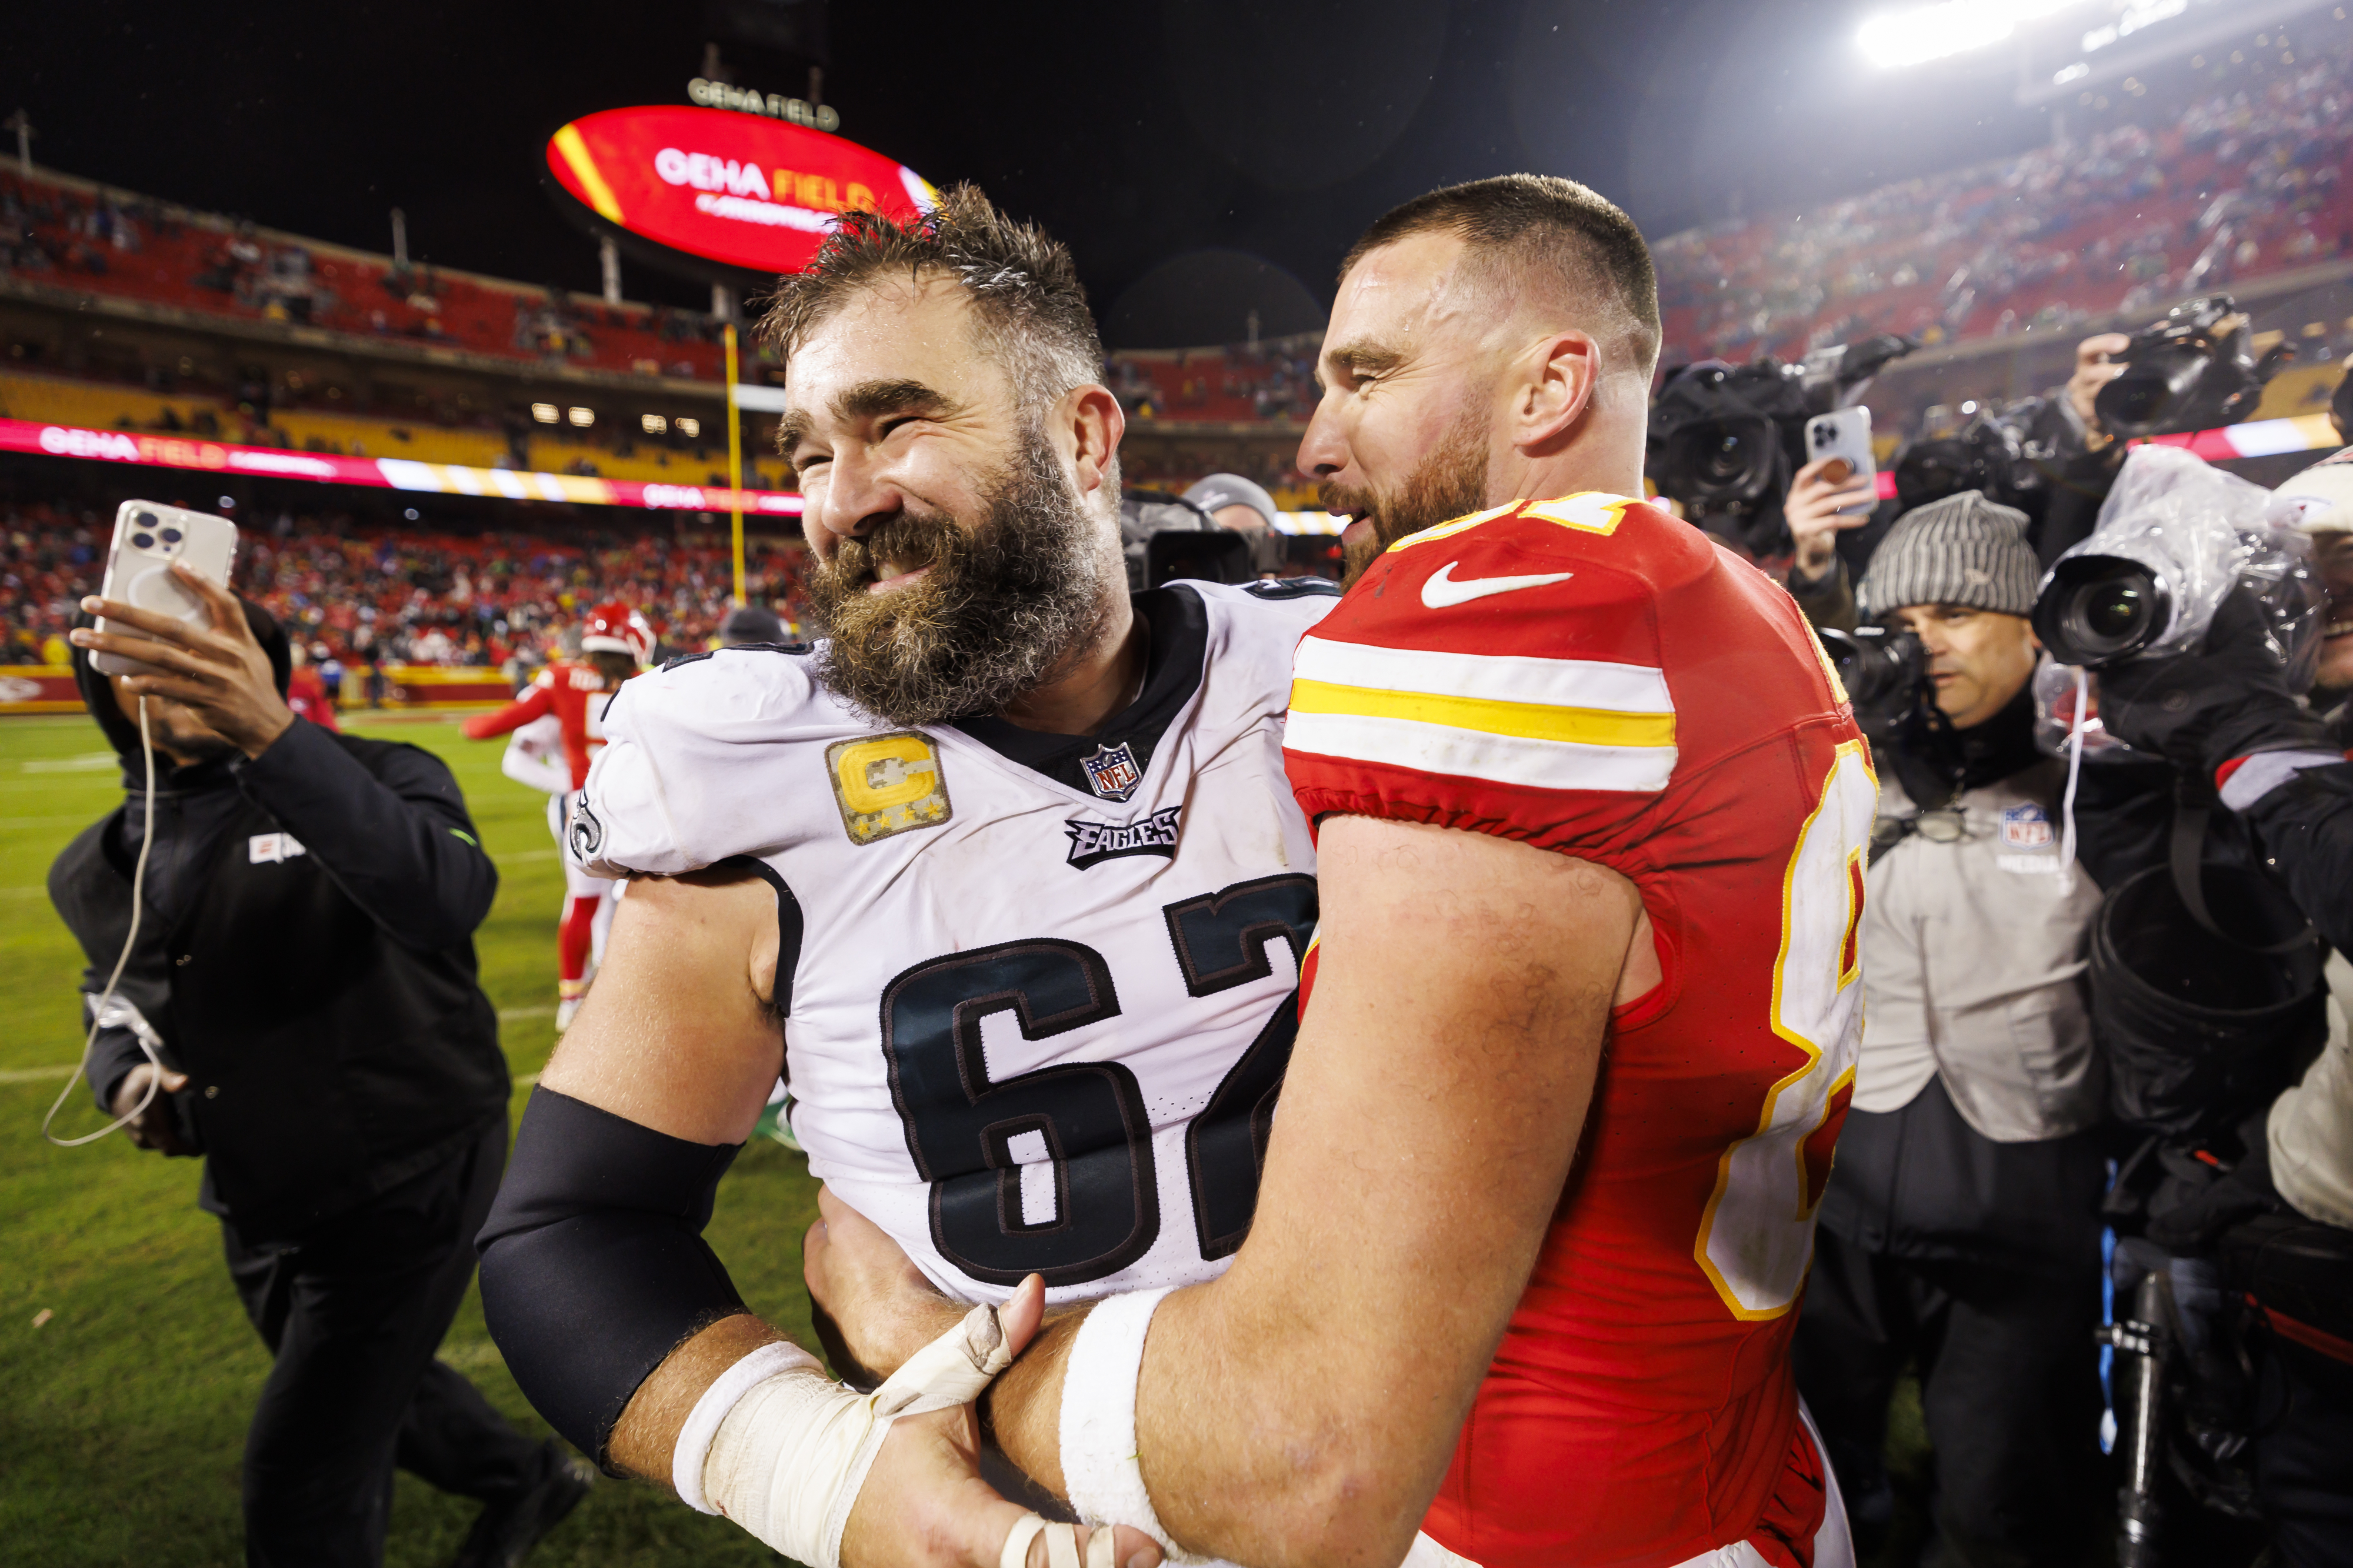 The Kelce brothers embracing each other after a game